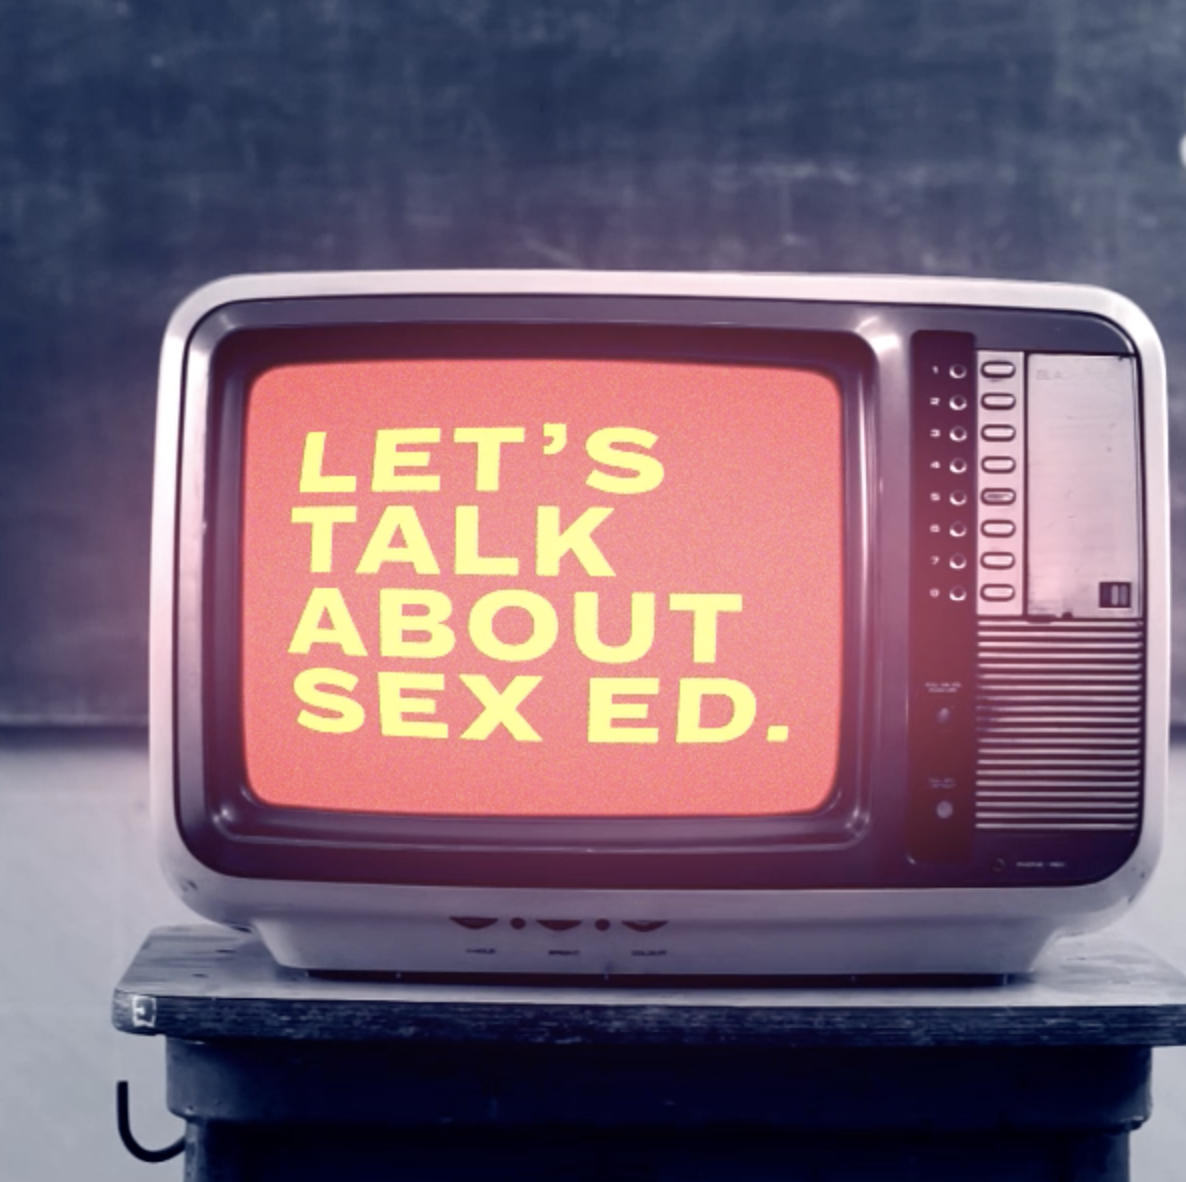 Let's Talk About Sex Ed